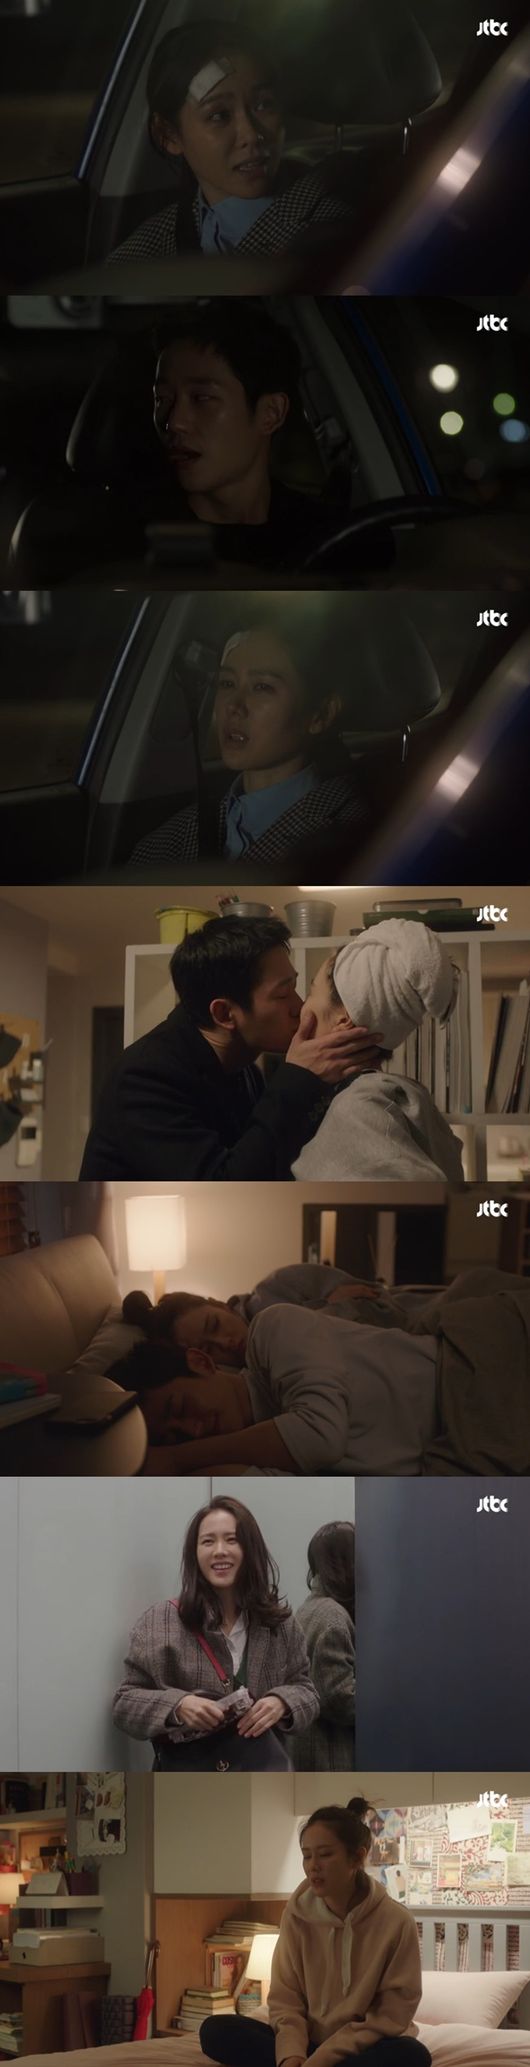 Beautiful older sister Songhyejins Lovely danced a younger man Jung Hae-In.Kemi of Son Ye-jin and Jung Hae-In is more and more ripe.It seems that the atmosphere of two people and acting are getting the perfect combination that matches well enough to purchase the doubt (?) That it is an actual lover.Two people who arouse viewers romantic cells, on gold, on Saturday evening, depicting the romance of a man of young and older women younger than that or this.Comprehensive organization channel JTBC Gumdodrama Pretty older sister who bought rice often (Screenplay Kim, director Ann Pansok) gave a crush in the midst of tea time.The reaction is also hot enough to expand the romance of Yoon Jin-ah (Son Ye-jin minutes) and Seo Jun-hee (Jung Hae-In minutes).Yoon Jin-ah and Seo Jun-hee string into a couple that induces a satisfying smile at a lovely appearance as romance gets higher.Exhibiting special affection for each other Showing the power of love through Yoon Jin-ah and Seo Jun-hee exposed.It is Seo Jun-hee who confesses that It seems that it really can not survive without Yoon Jin-ah and that he will stay by Yoon Jin-ah even if she is cut at the company.Yoon Jin-ah has also changed to a person who can meet saying Seo Jun-hee, making it impossible for the company to make an unreasonable request.It was the power of love of each other.Toxic Son Ye-jin and Jung Hae-In Kemi are beautifully drawn works and two people look like love.In fact during the play even the older female young guys make perfect their own characters, more realistic south way Kemi while being doing good lover acting.The charm of the character gets bigger and the charm of the actor is also increasing.Especially Son Ye-jin seems to be Romance Queen, even in this work, a charming character was born.It was a melodic act that could only be persuasive even by the name Son Ye-jin.Being able to see more exciting works with Son Ye-jin and more attractive to Yoon Jin-ah than anything else.As the romance began, the viewers also made Seo Jun-hee solely submerged in lovely Yoon Jin-ah wearing until Lovely.Son Ye-jin and the actors bottom power.Sorrowfully from Yoon Jin-ah, a hard-working person for former boyfriend Seo Jun-hee was also mellowing in her lavely.Also, in past broadcasts, Yoon Jin - ah and Seo Jun - hee s secret love affair, the circumstances that are disclosed to families are announced and the situation is being raised up to tension.In the broadcast on the last 21 days, Yoon Jin-ahs close friend Seo Jun-hees sister Seo Gyeong-son (Jeongseong-yeon minutes) Koshi gave a presentation showing awareness between these two people.Yoon Jin-ah clarified the relationship with Seo Jun-hee to his family, and Sogyeong-son tried to confess this, but he was already able to understand Seogyeong.I added pleasure to elements that maintain proper tension in sweet romance.